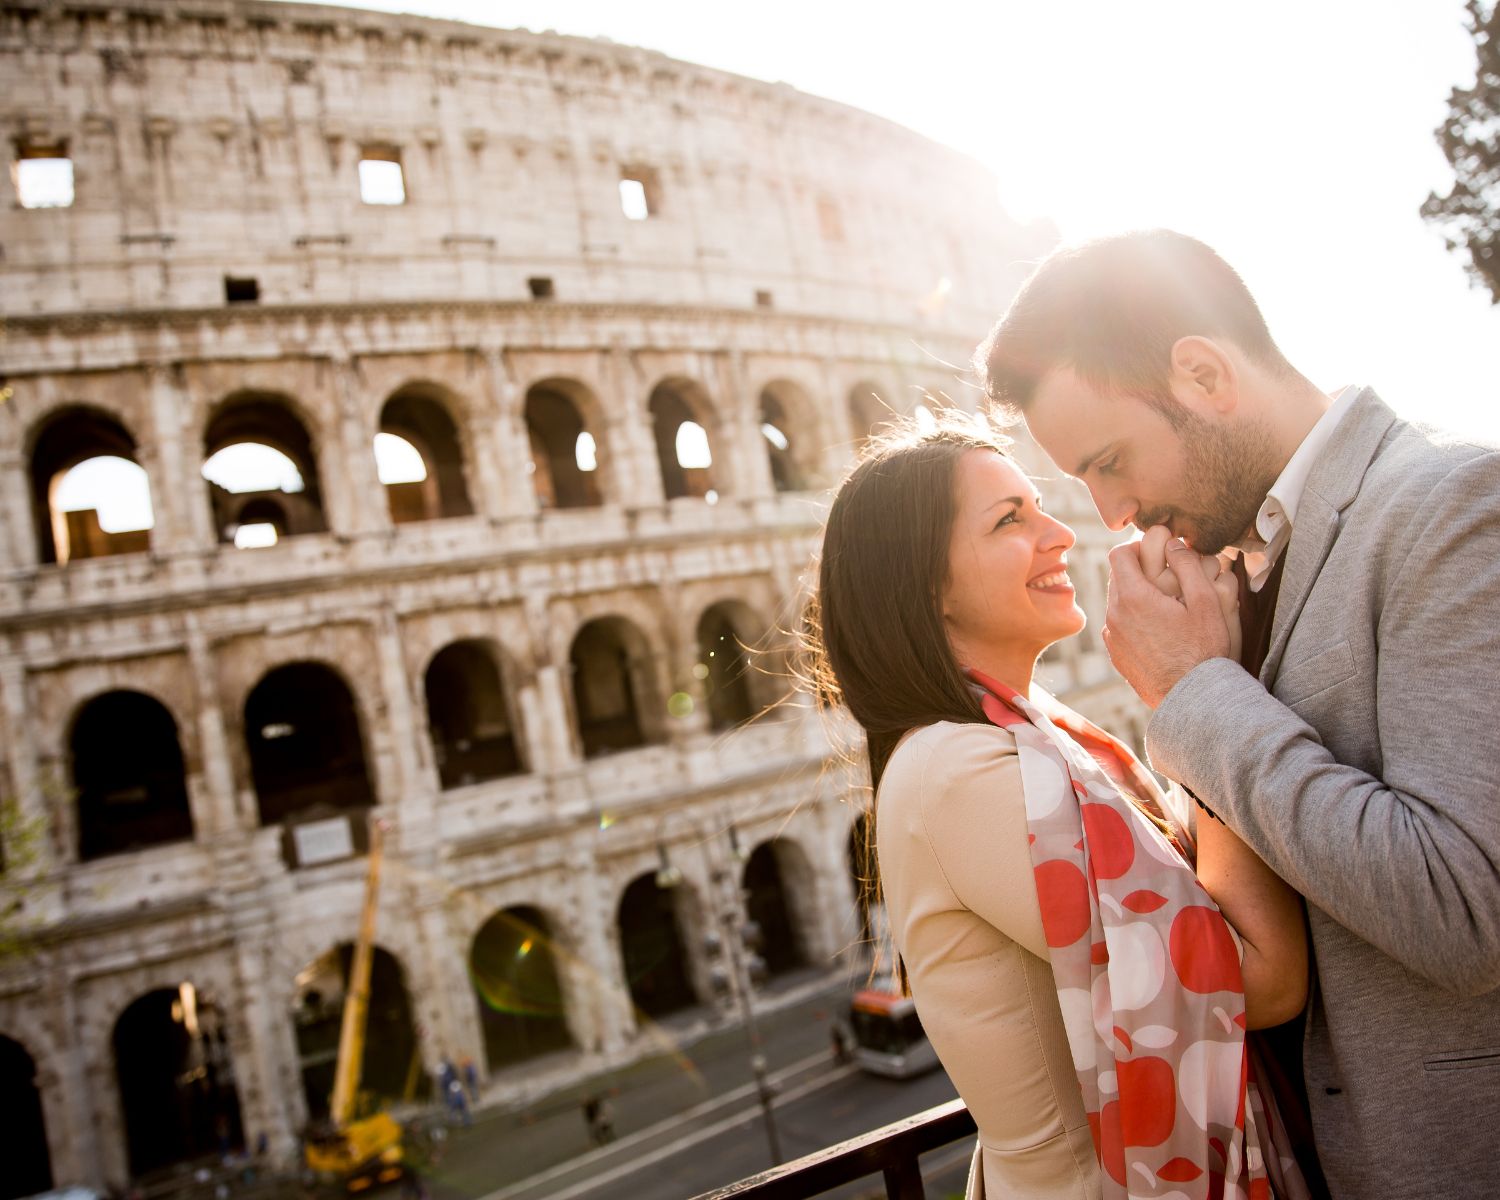 Have A Romantic Getaway in A City